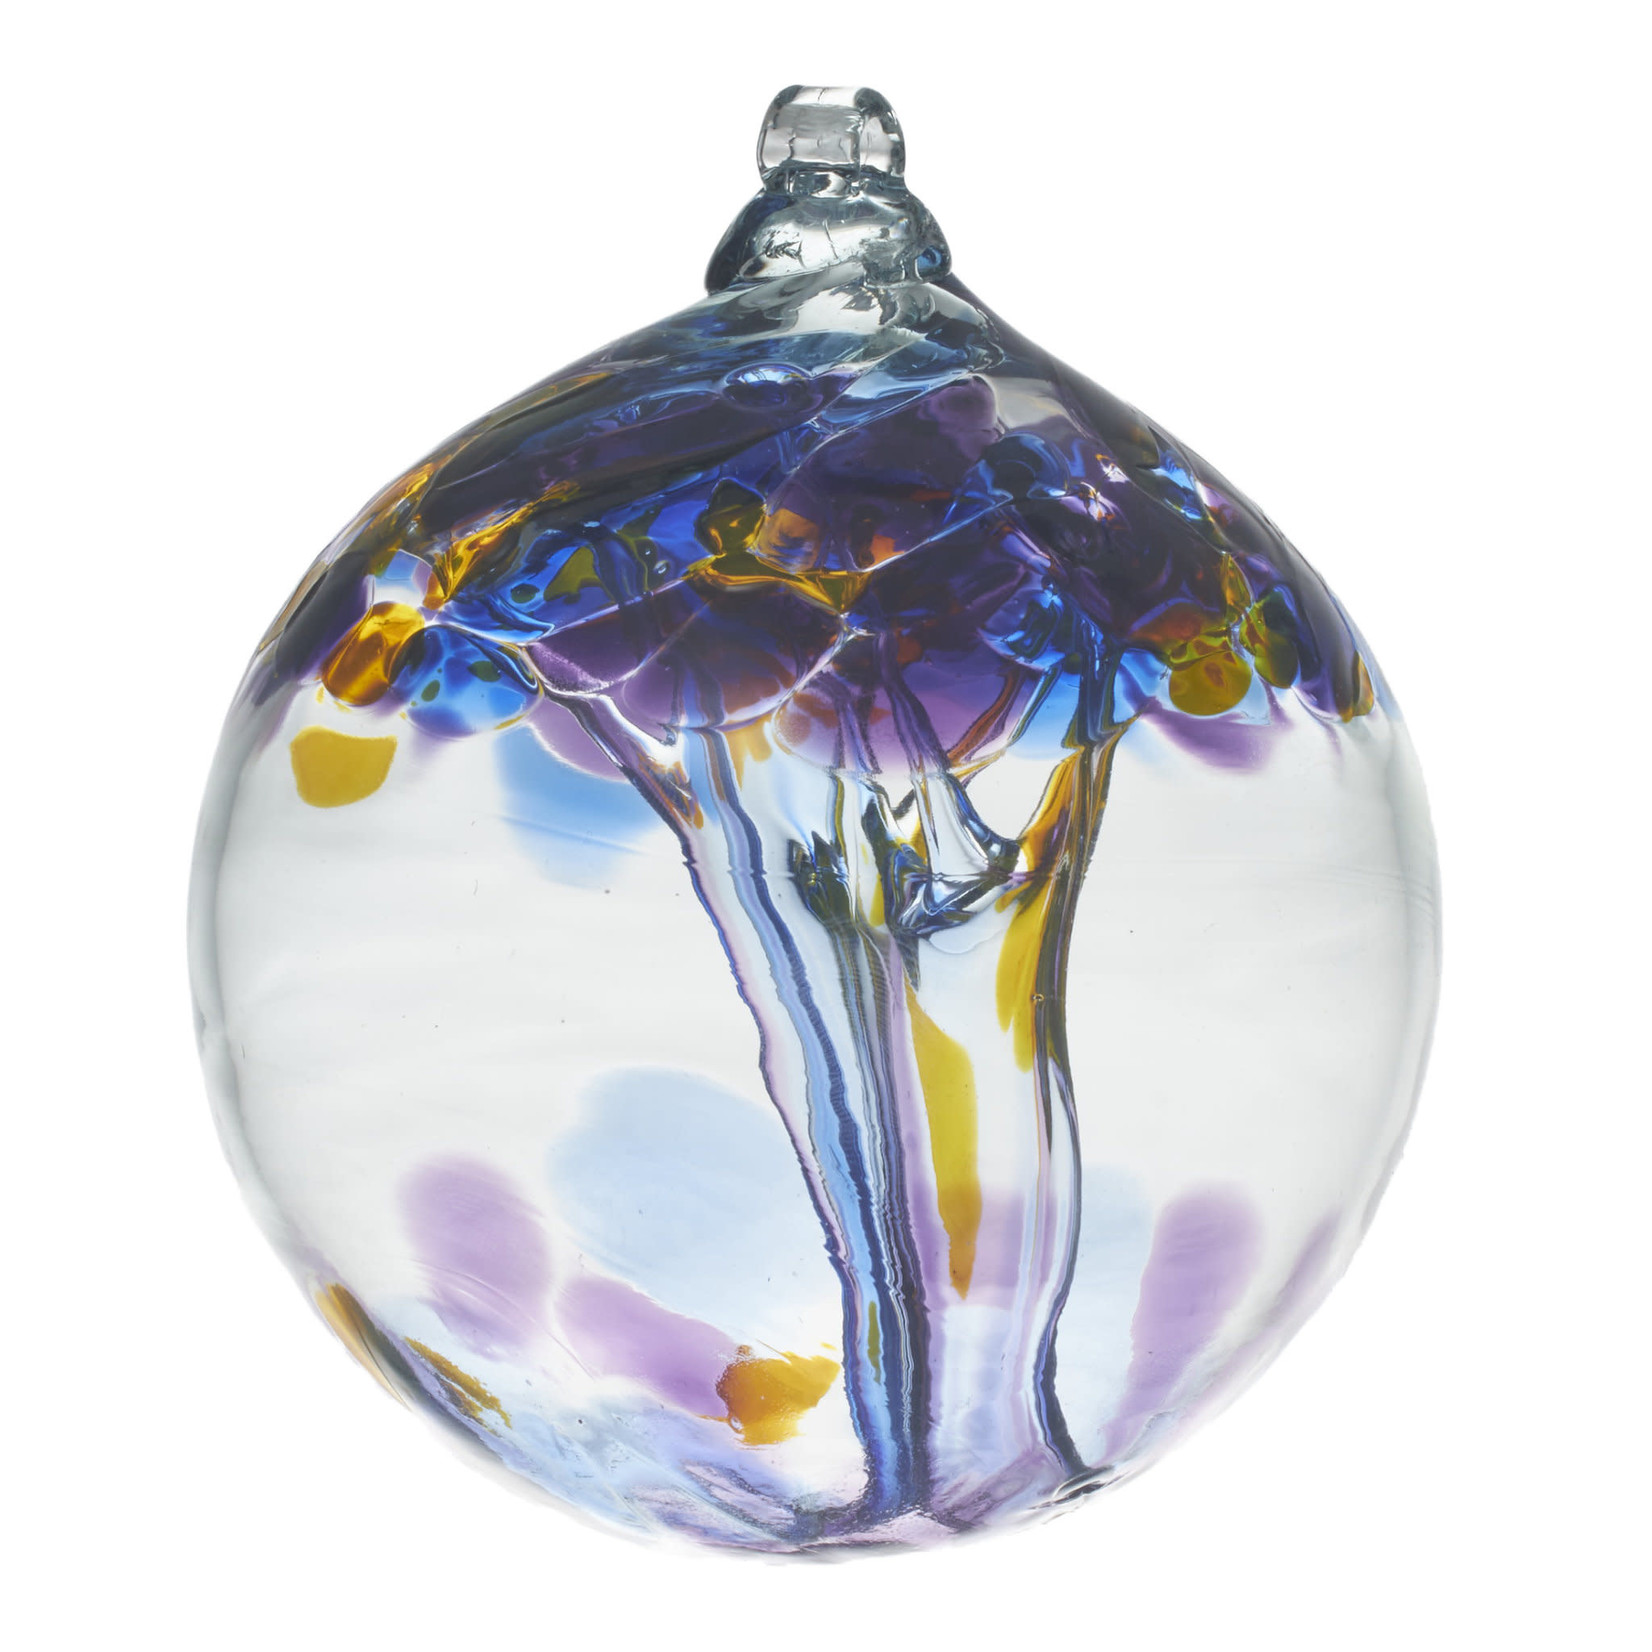 KITRAS 6" TREE OF ENCHANTMENT HANGING GLASS BALL - KNOWLEDGE